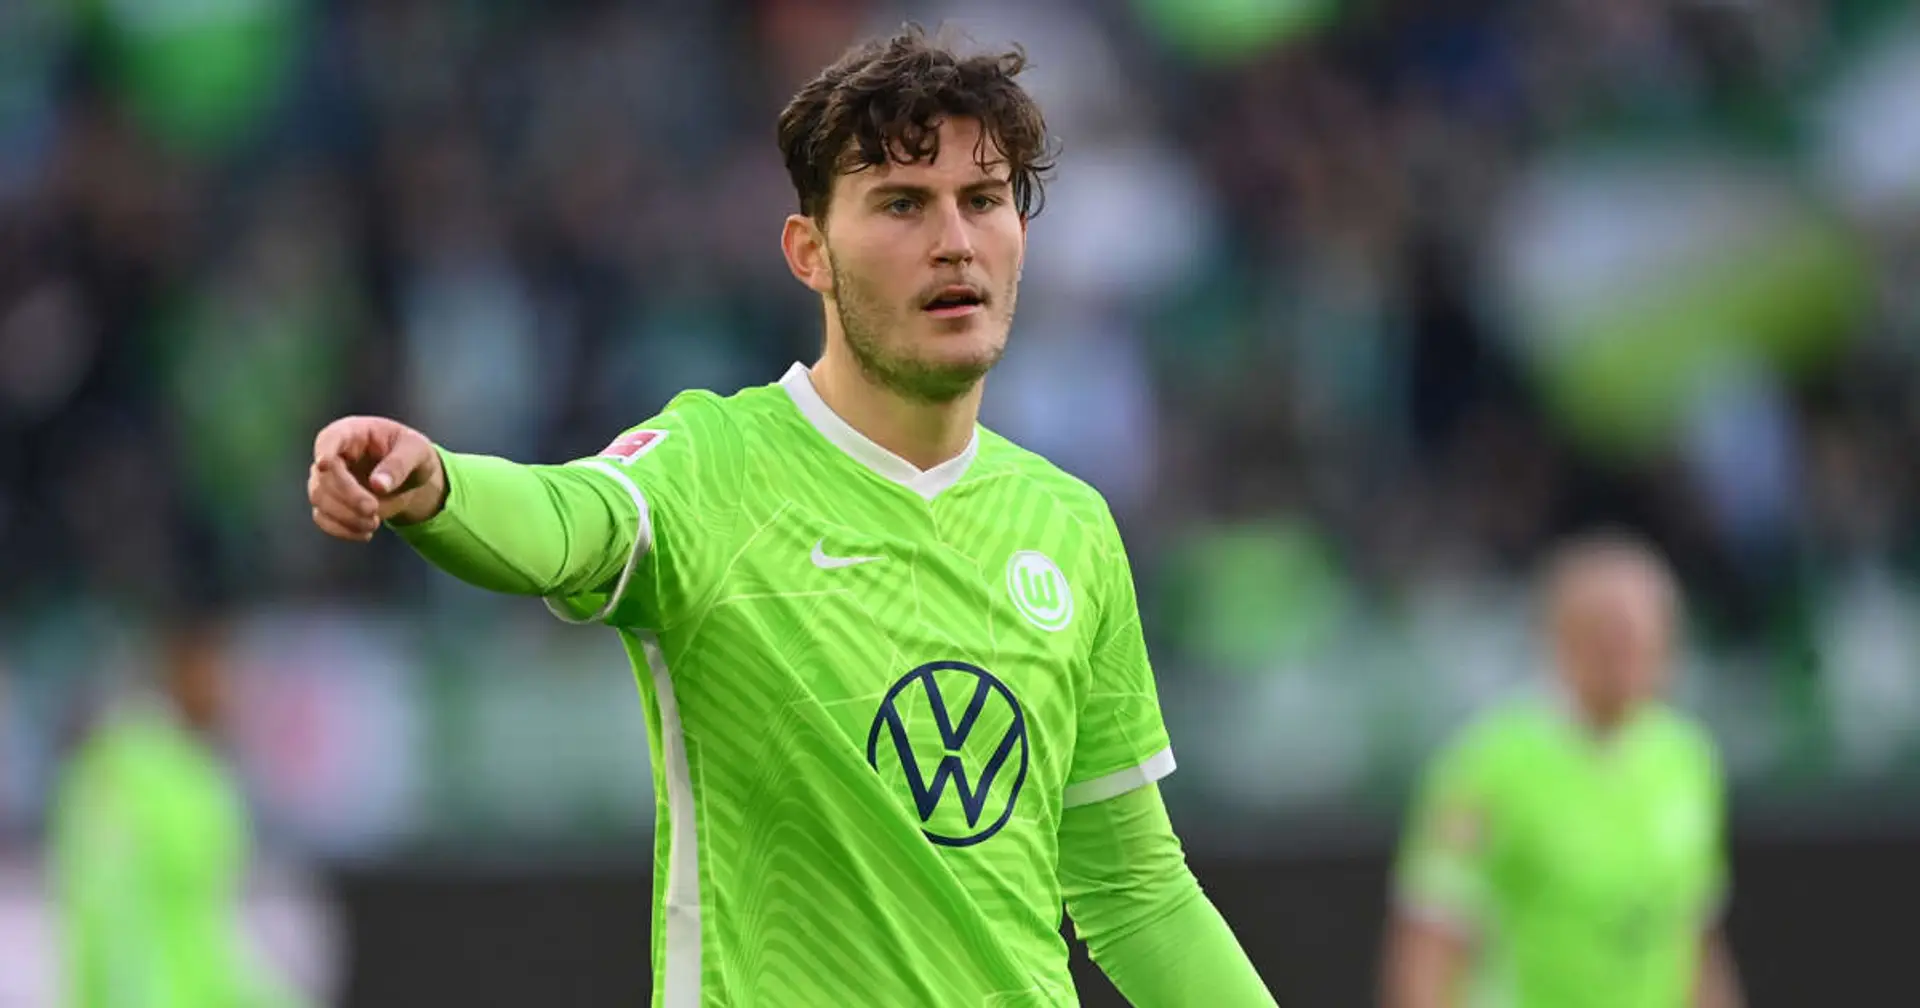 'A dream destination for me': Wolfsburg striker Jonas Wind hopes to be noticed by Arsenal